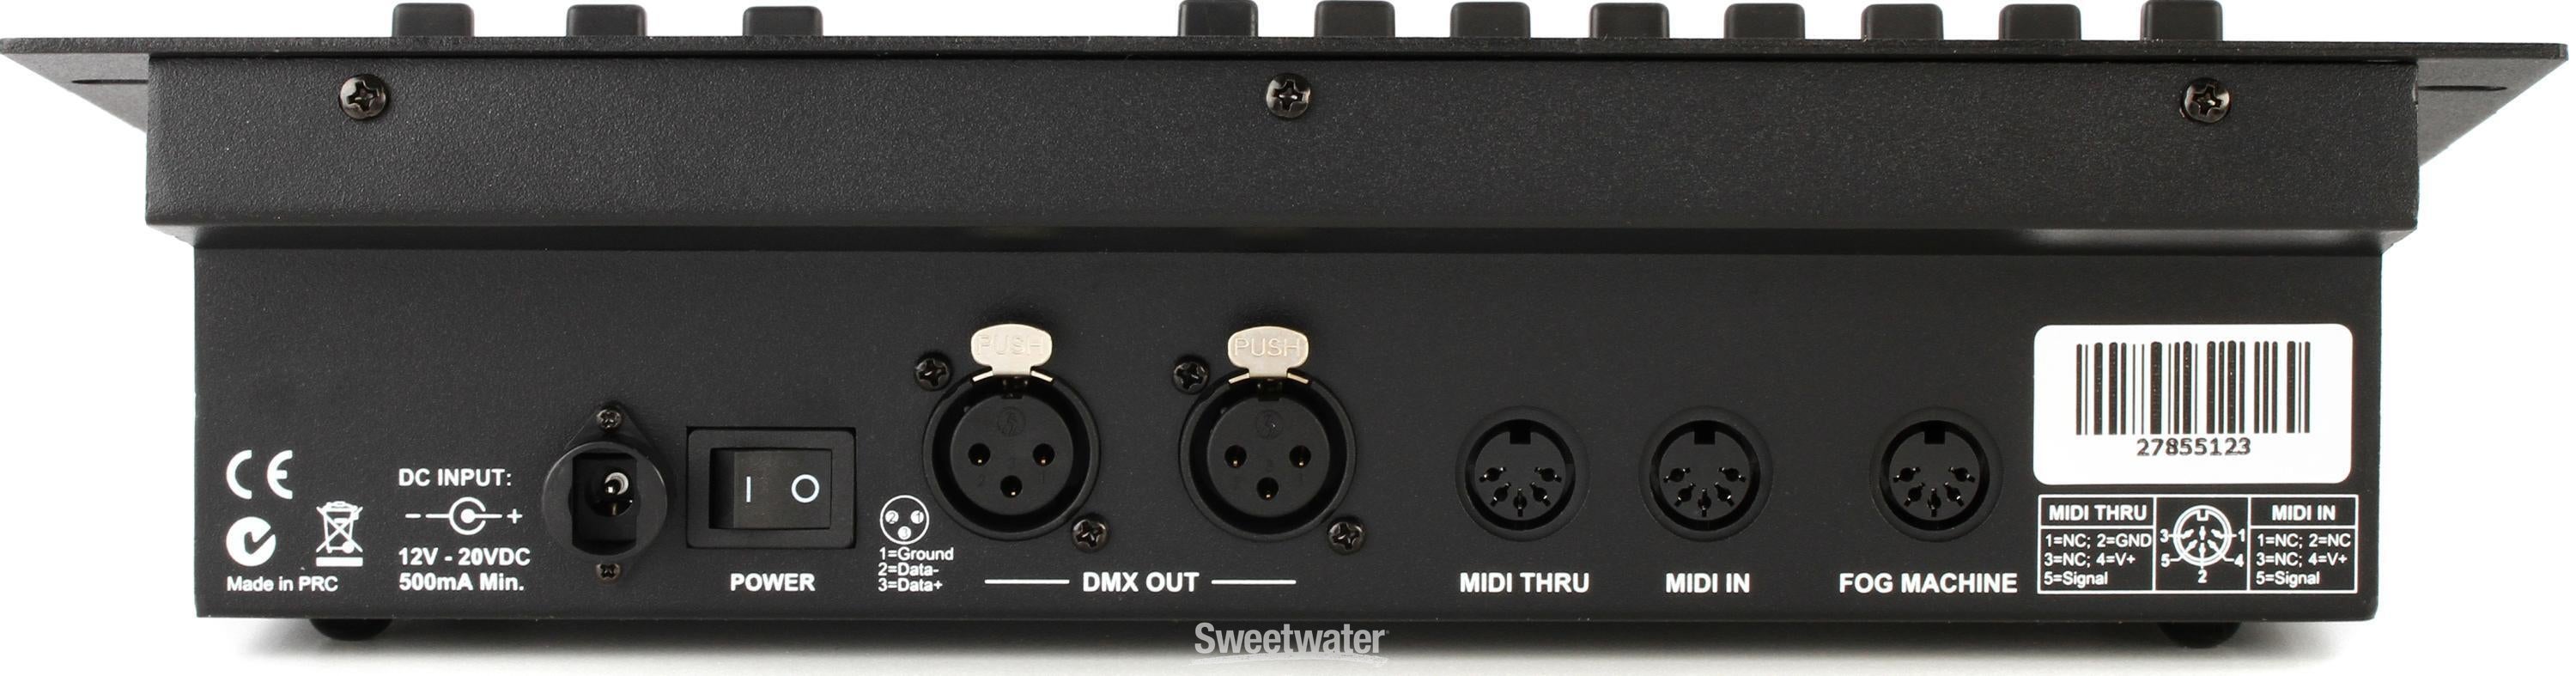 ADJ Stage Pak Lighting Controller Package with Stage Setter-8 and Two  DP-415 Dimmer Packs Sweetwater